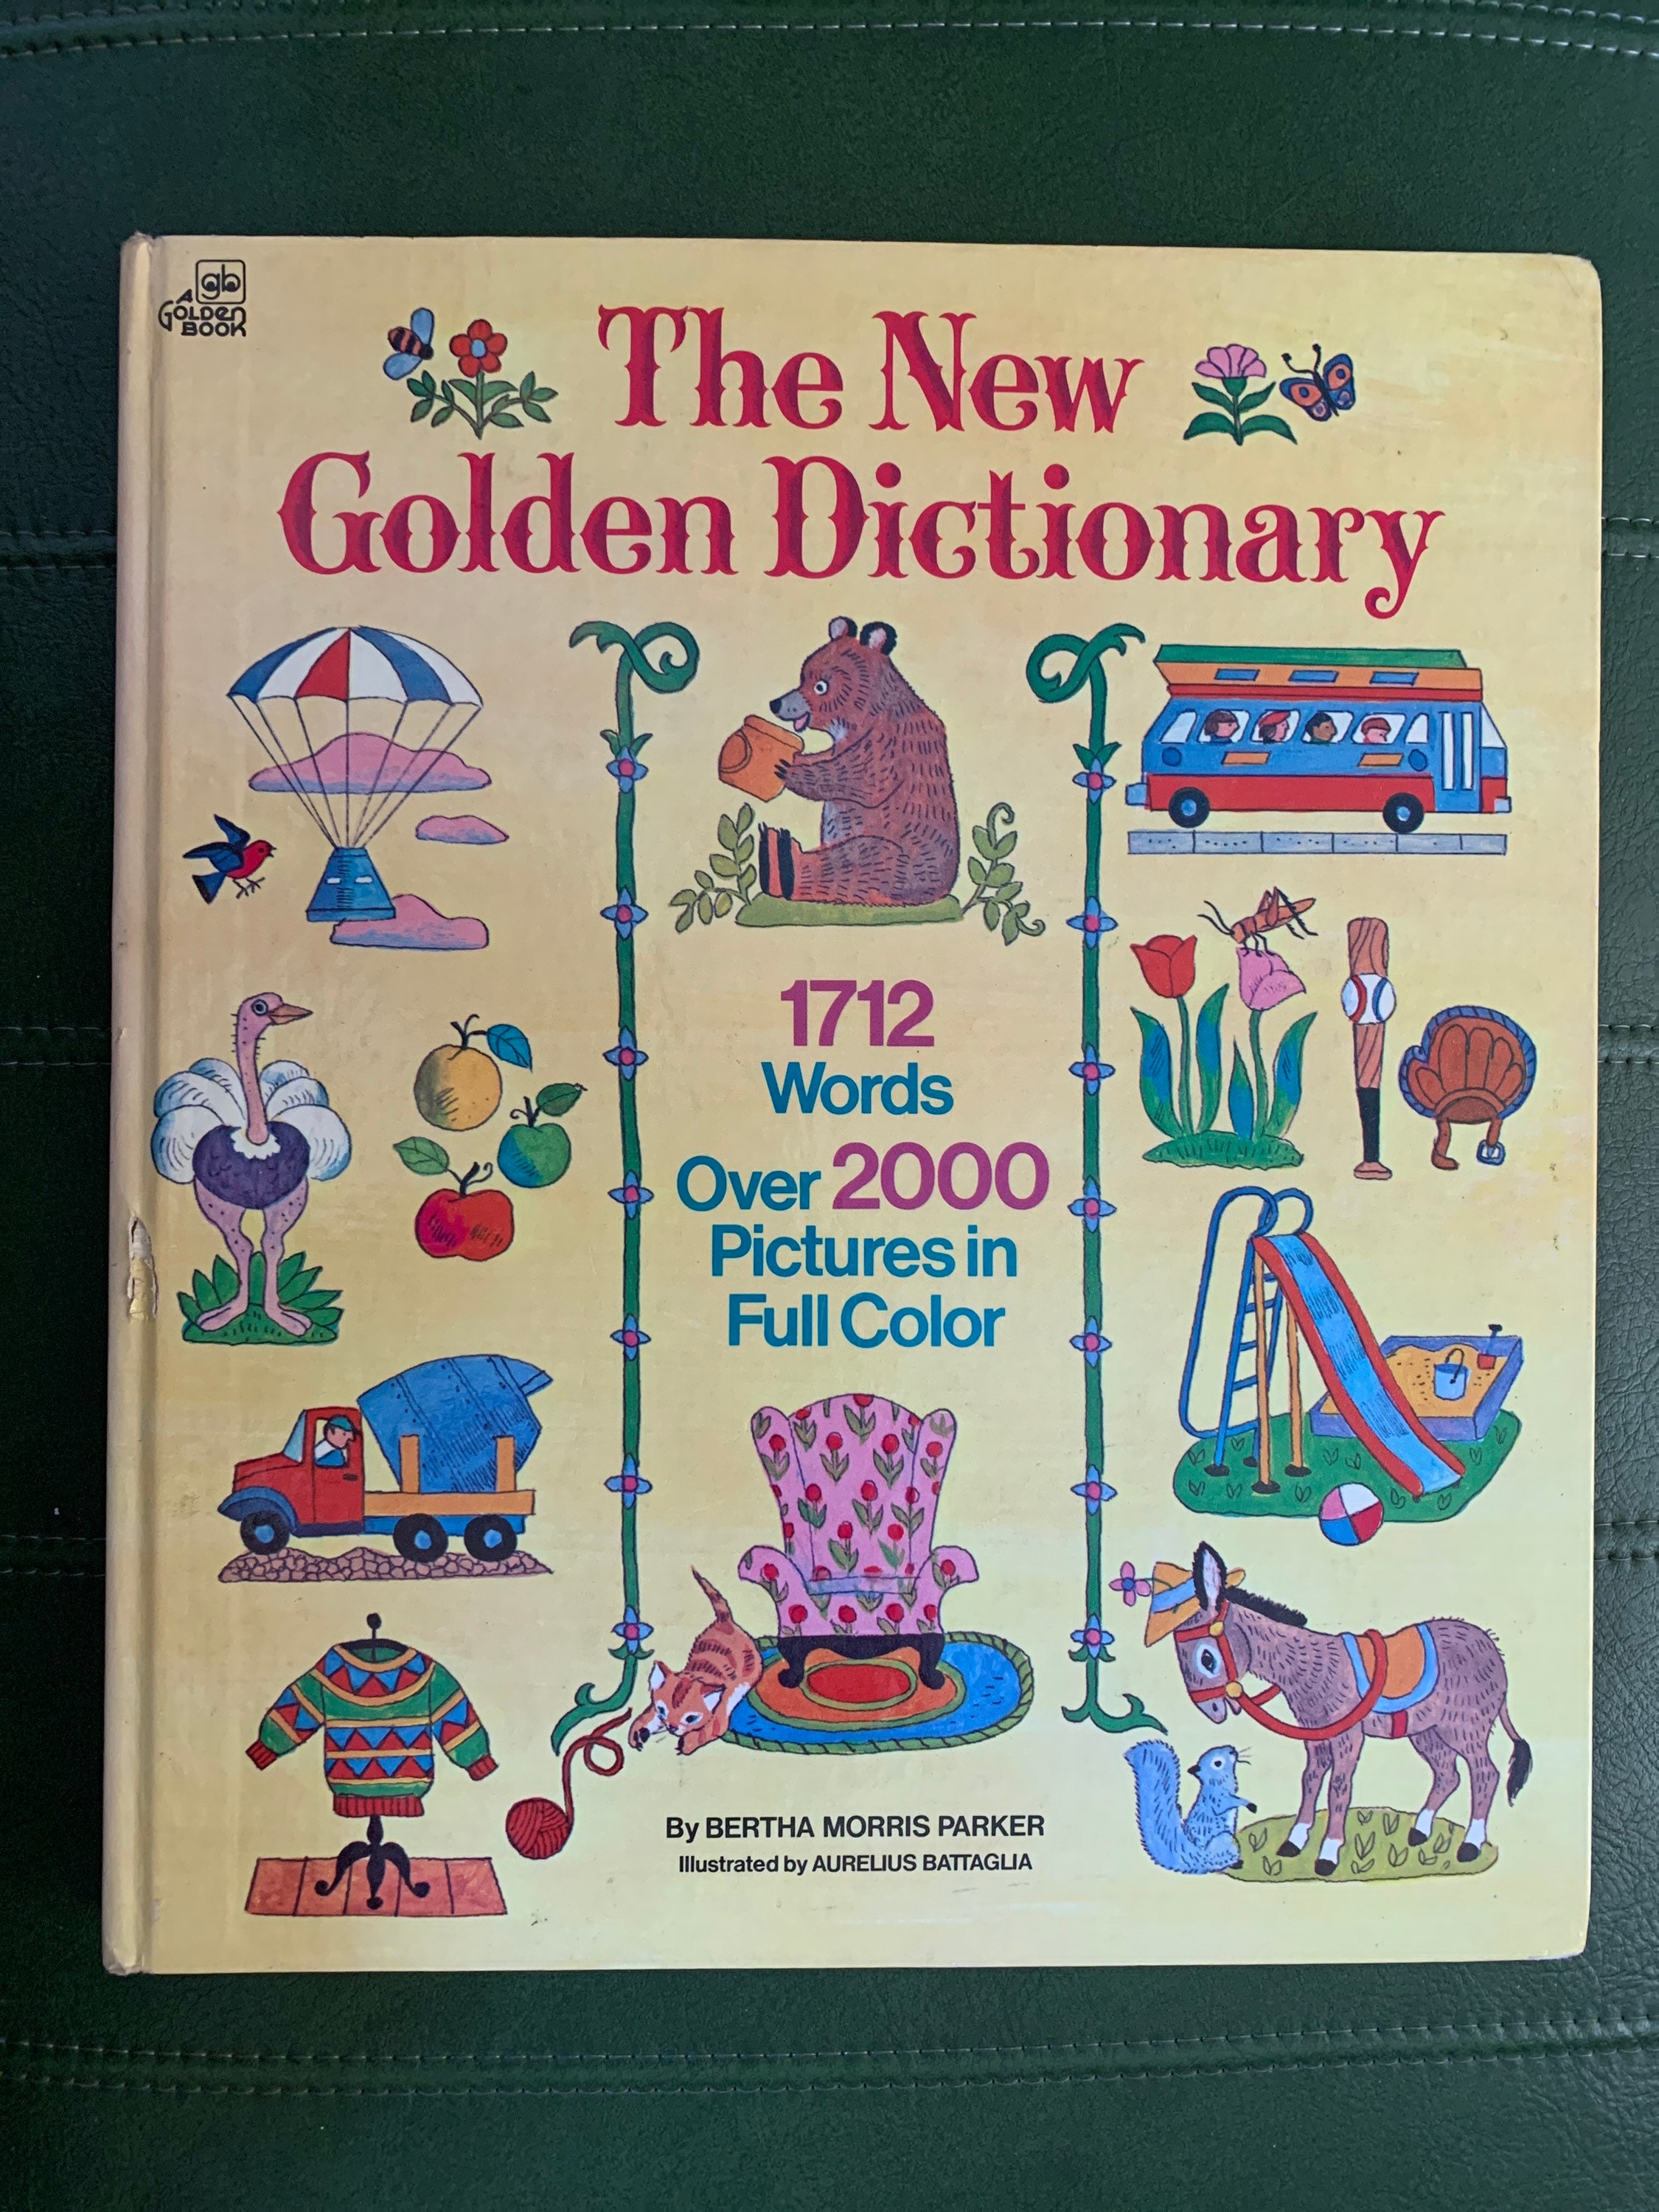 The New Golden Dictionary - Etsy